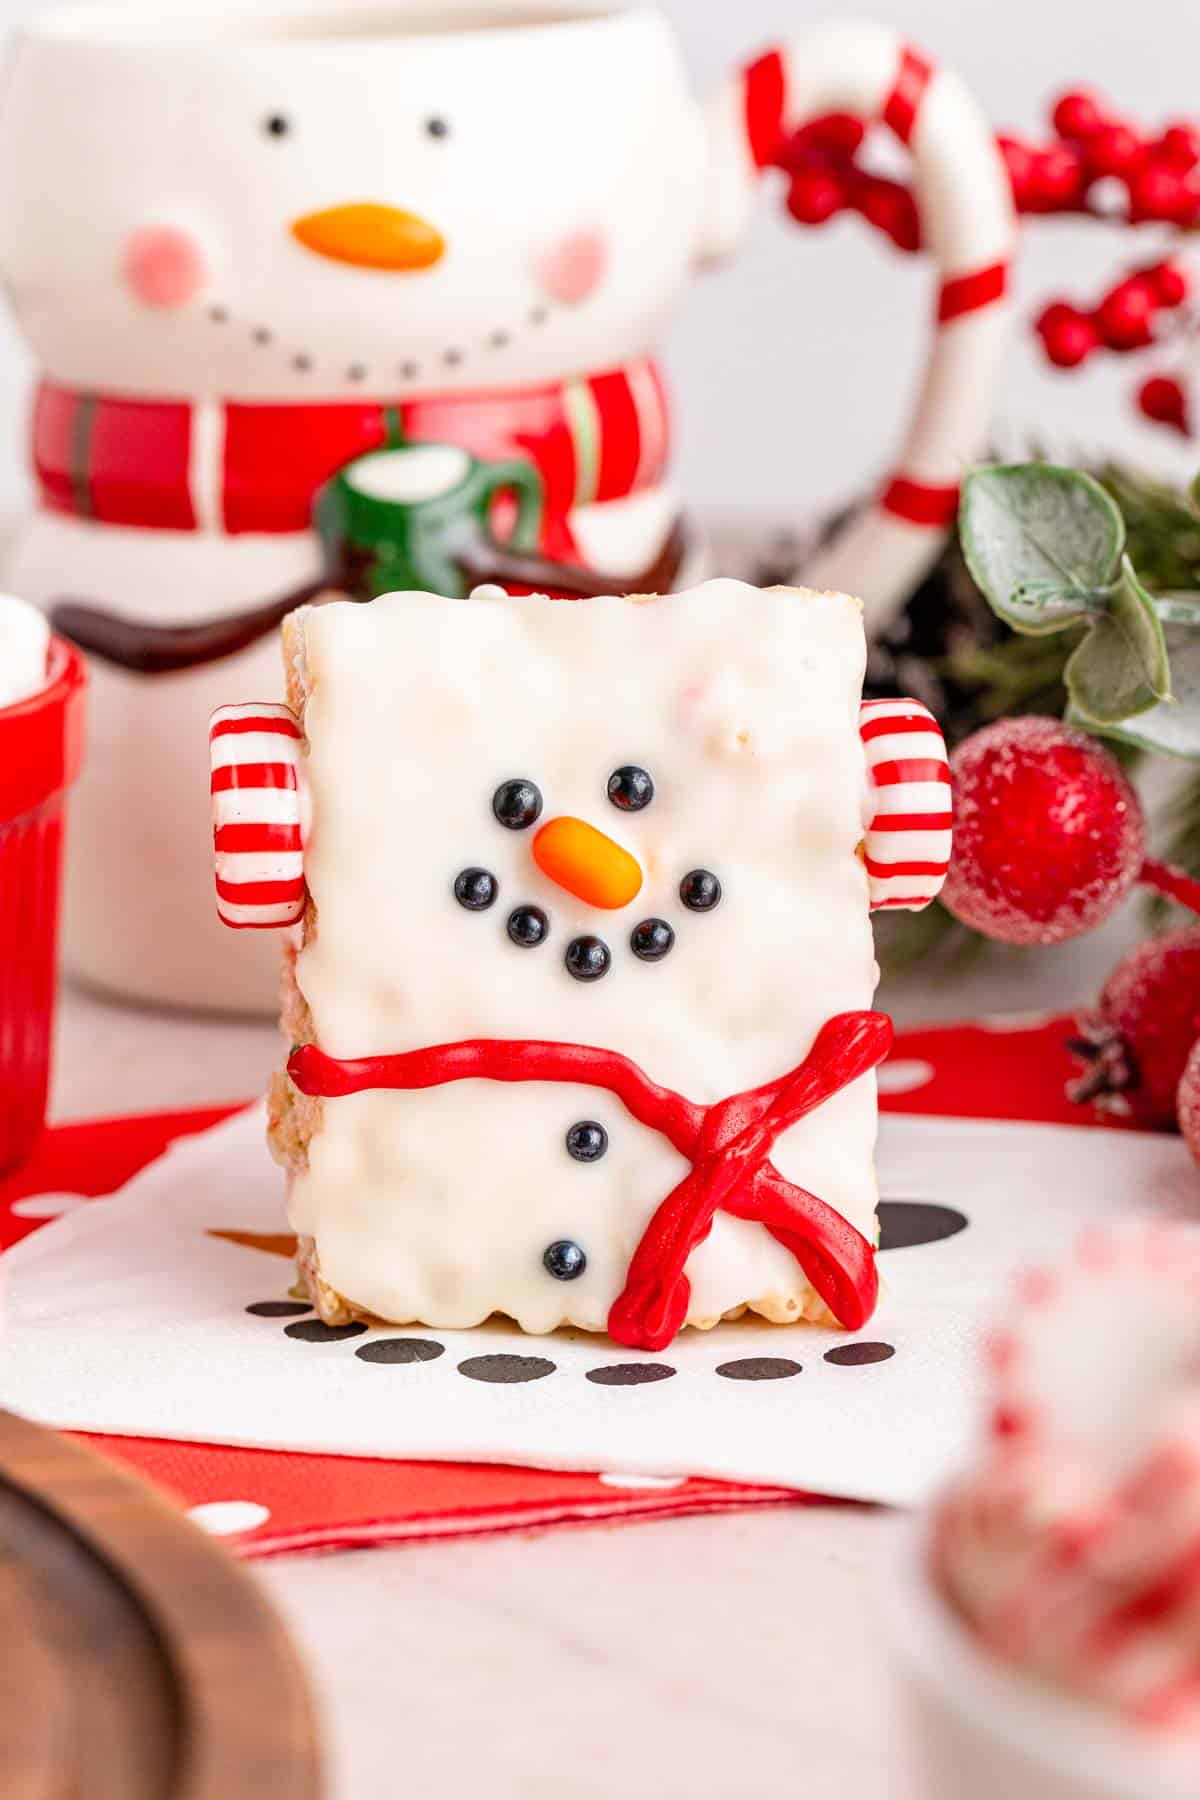 A snowman rice krispies treat standing up with Christmas decor in the background.